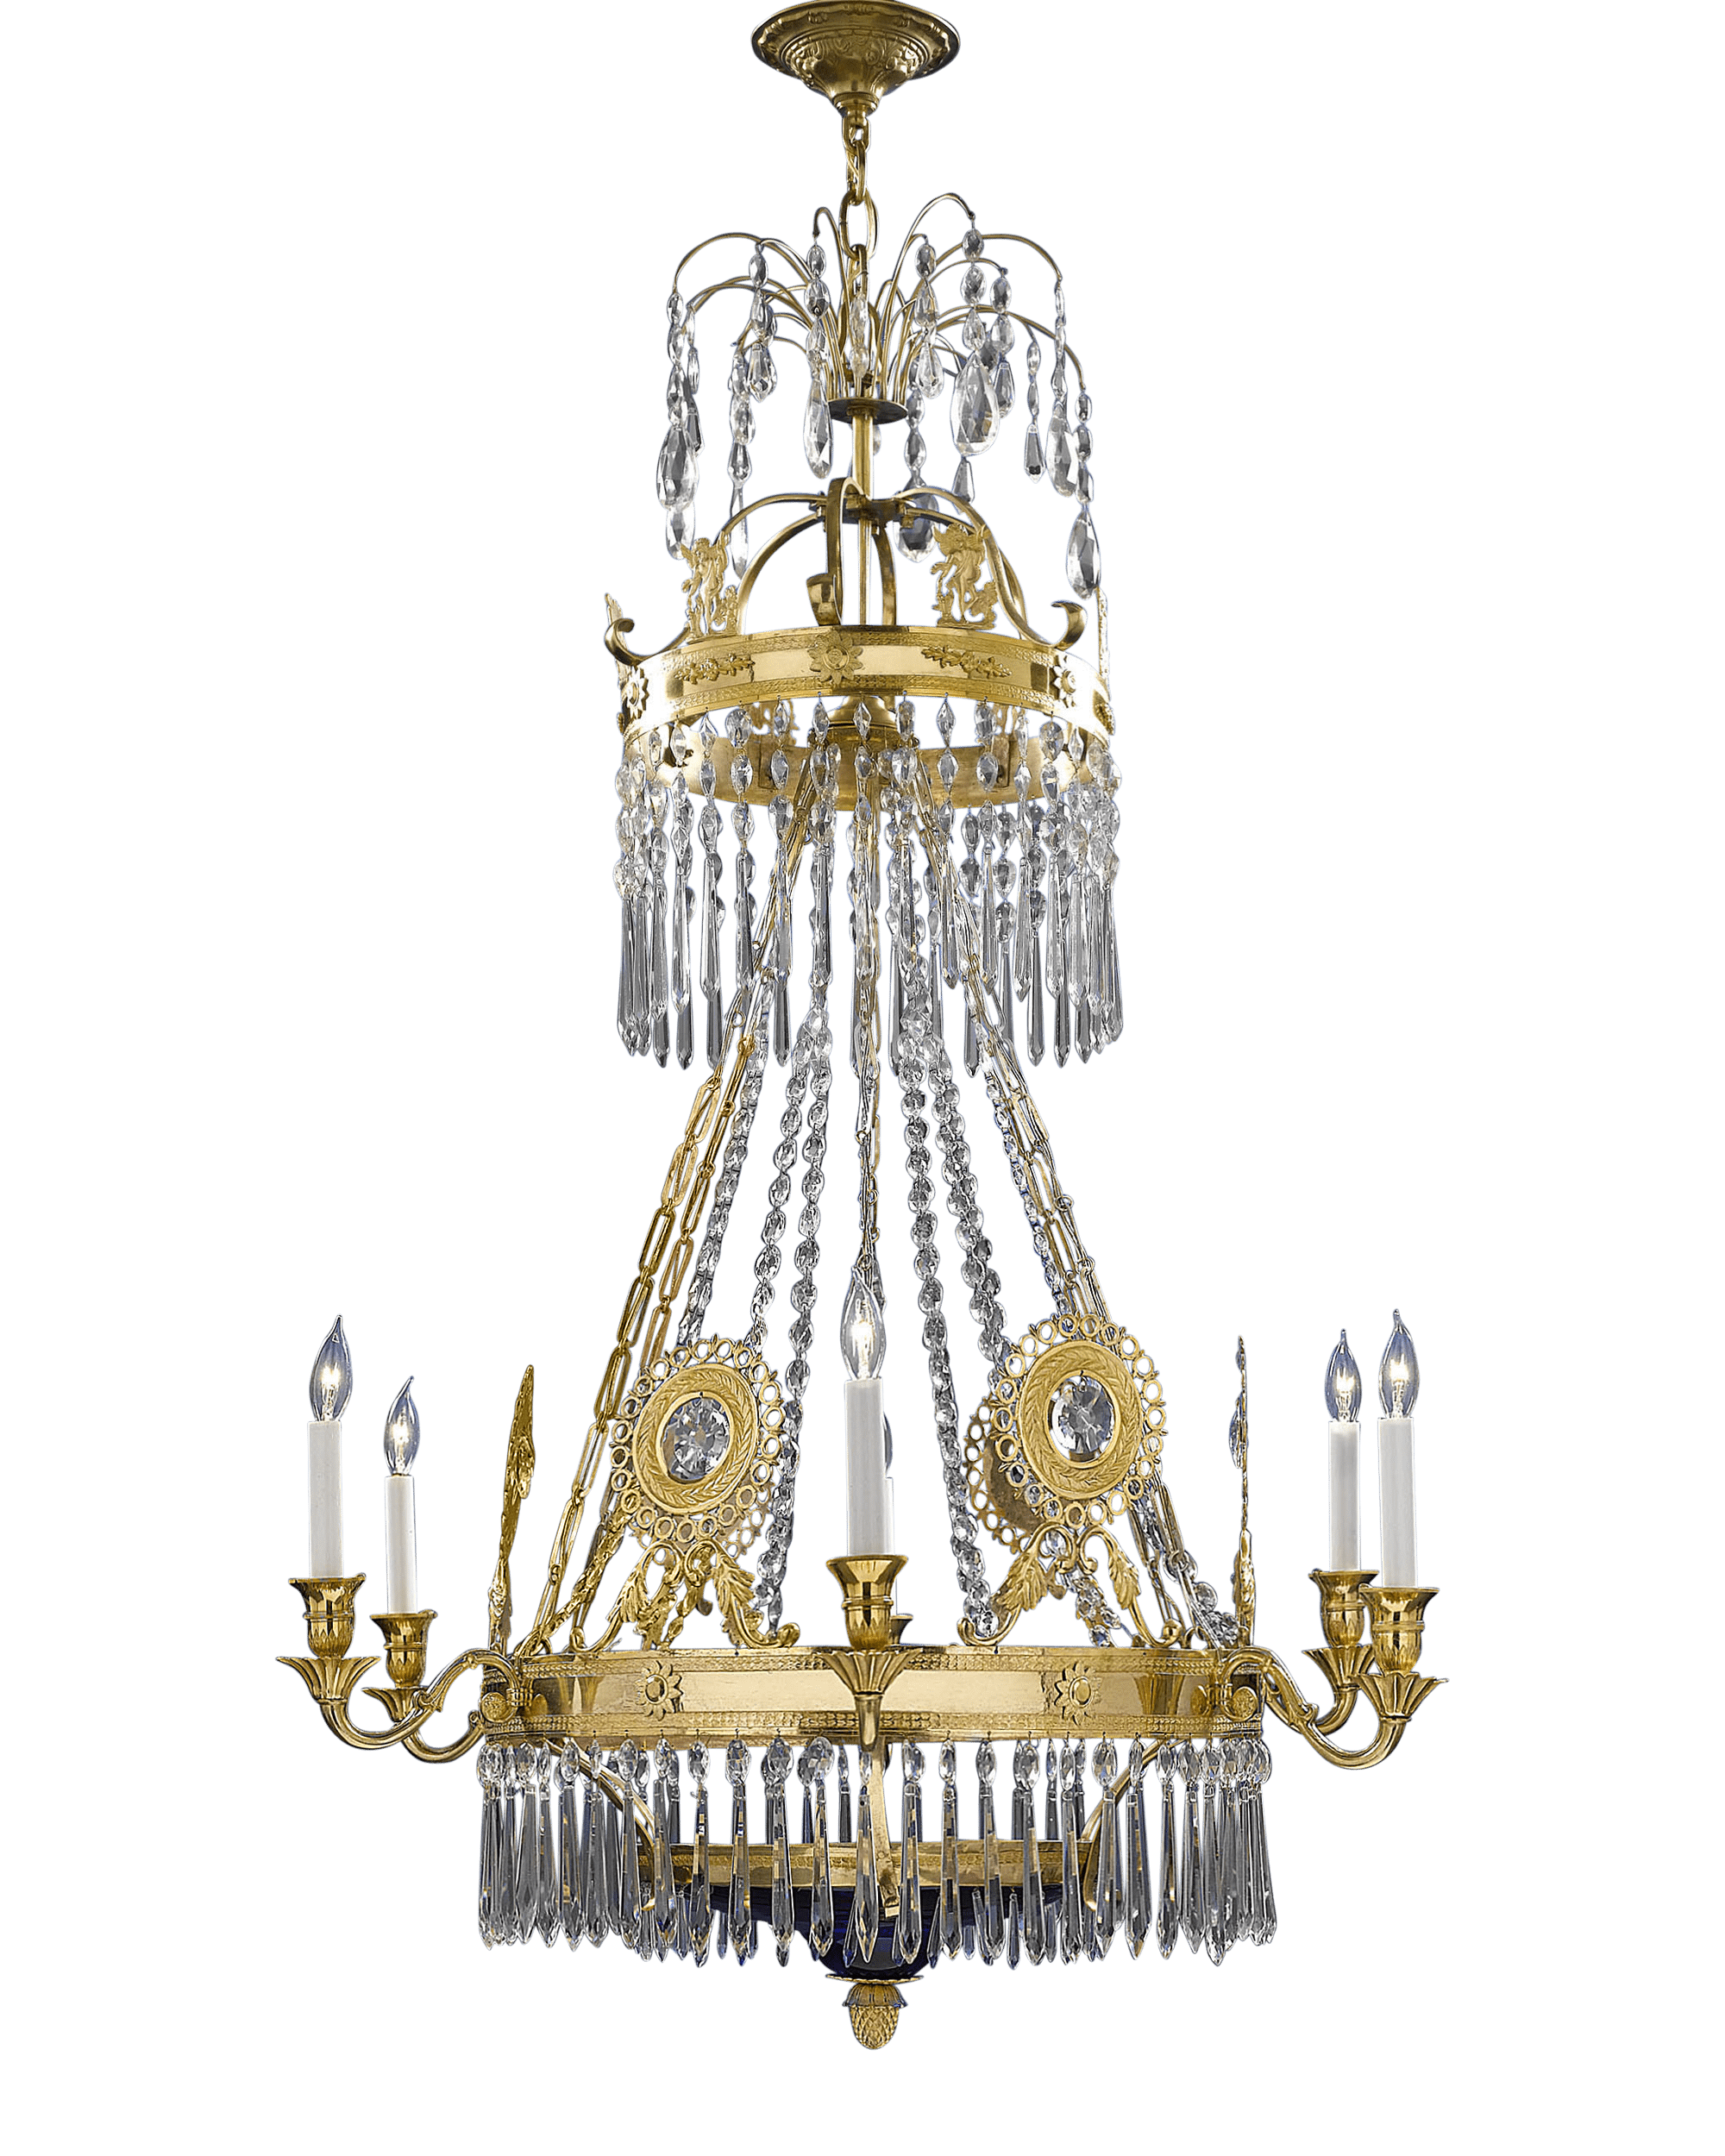 This six-light chandelier is an outstanding example of Russian glass and bronze work